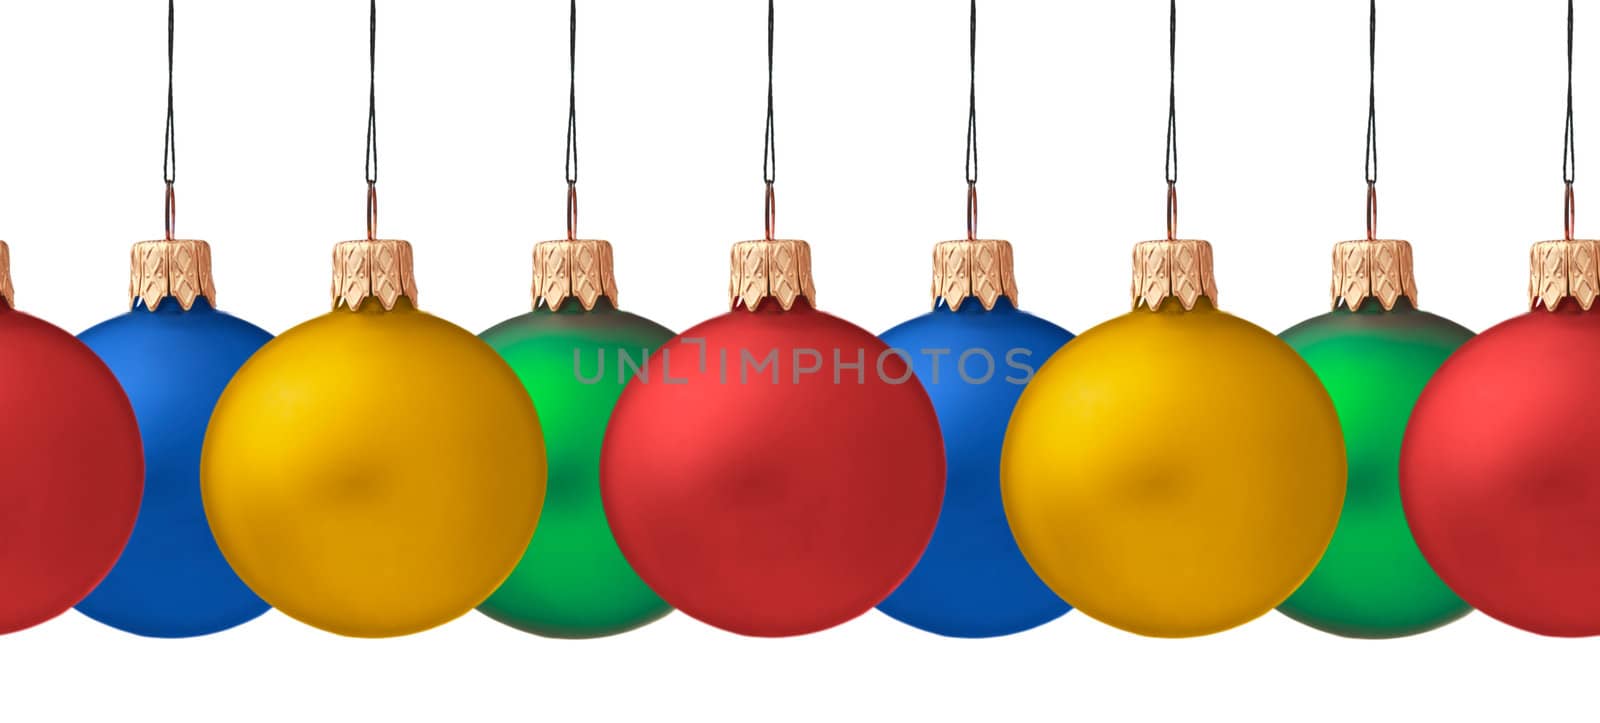 Row pf  hanging Christmas baubles isolated  on white background, seamless horizontally